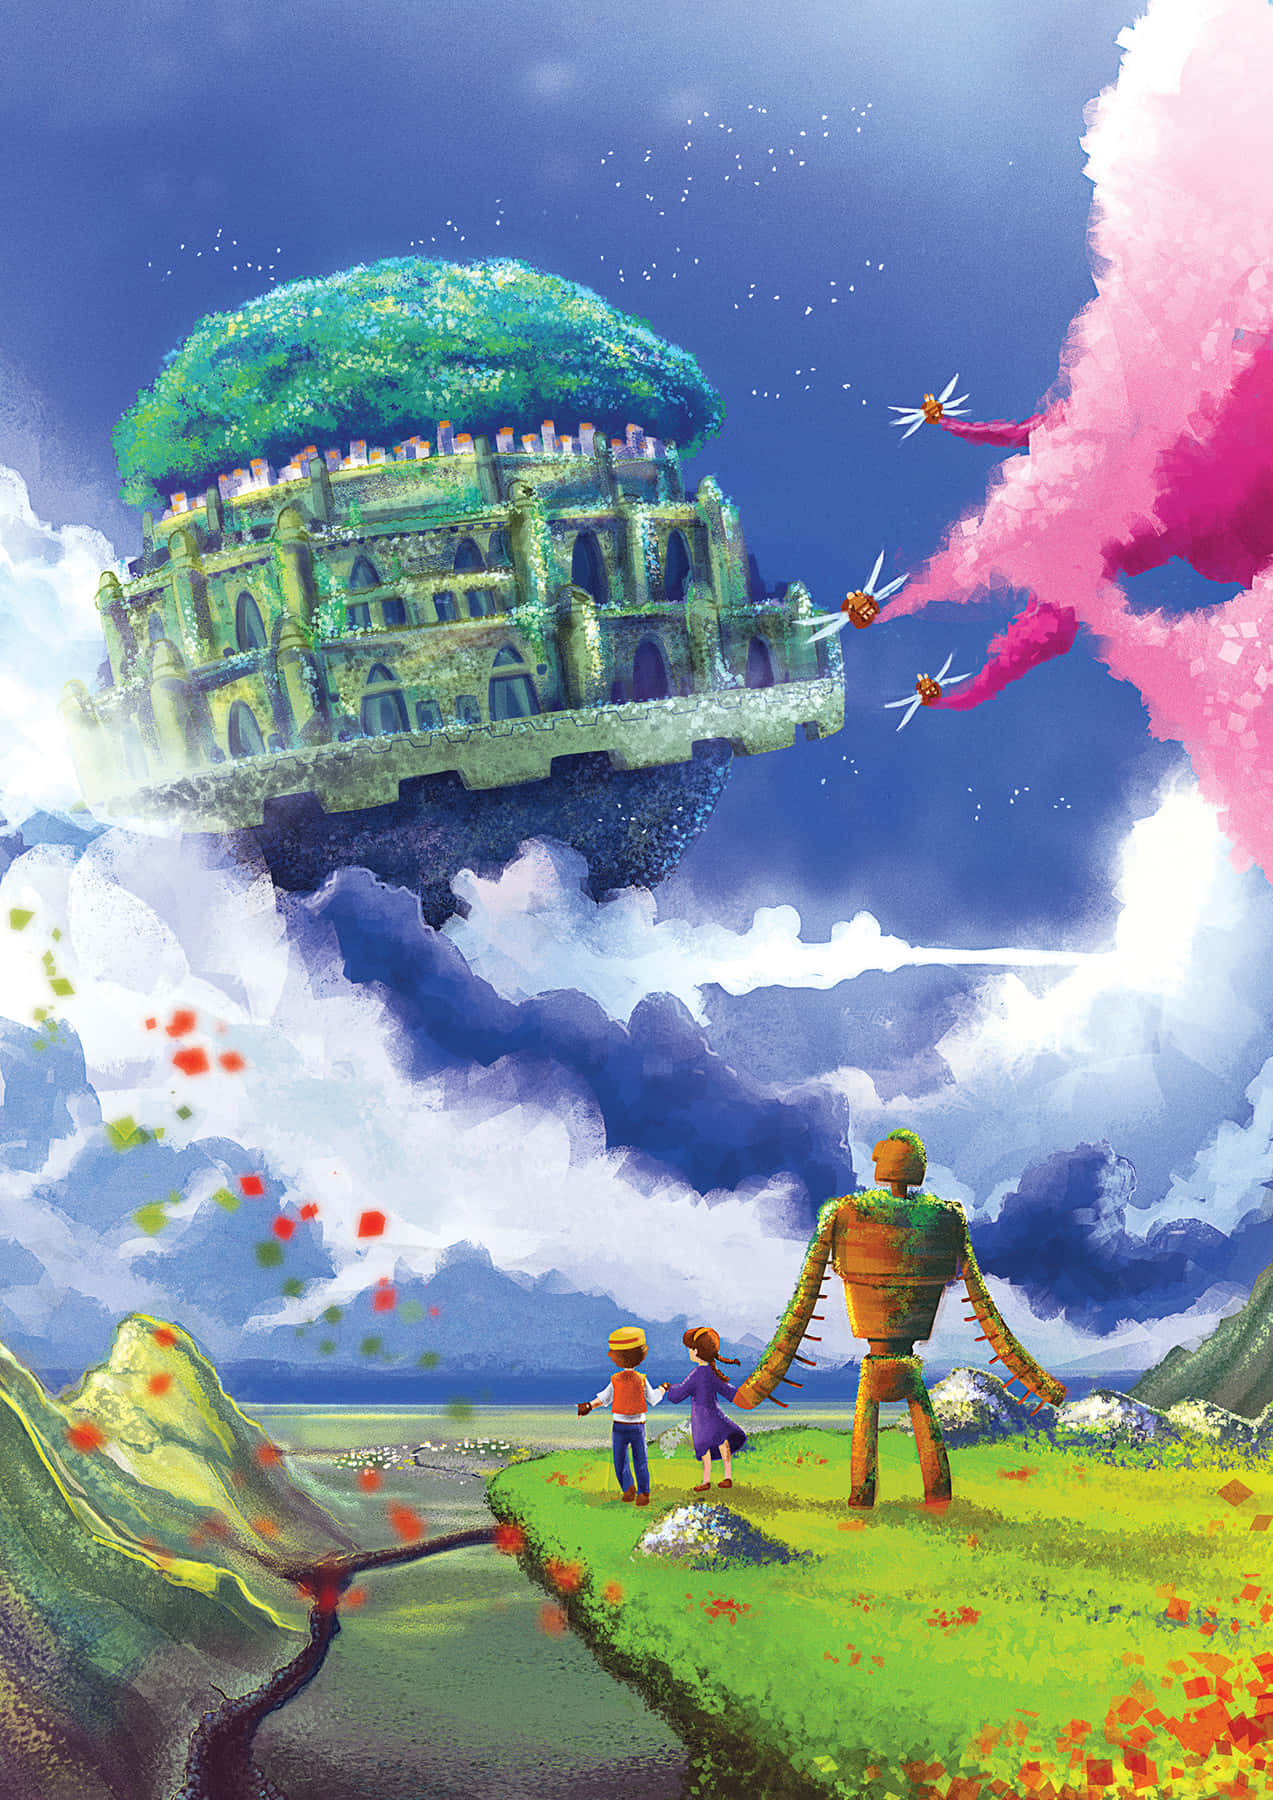 "Embark On An Epic Adventure To Laputa Castle In The Sky" Wallpaper